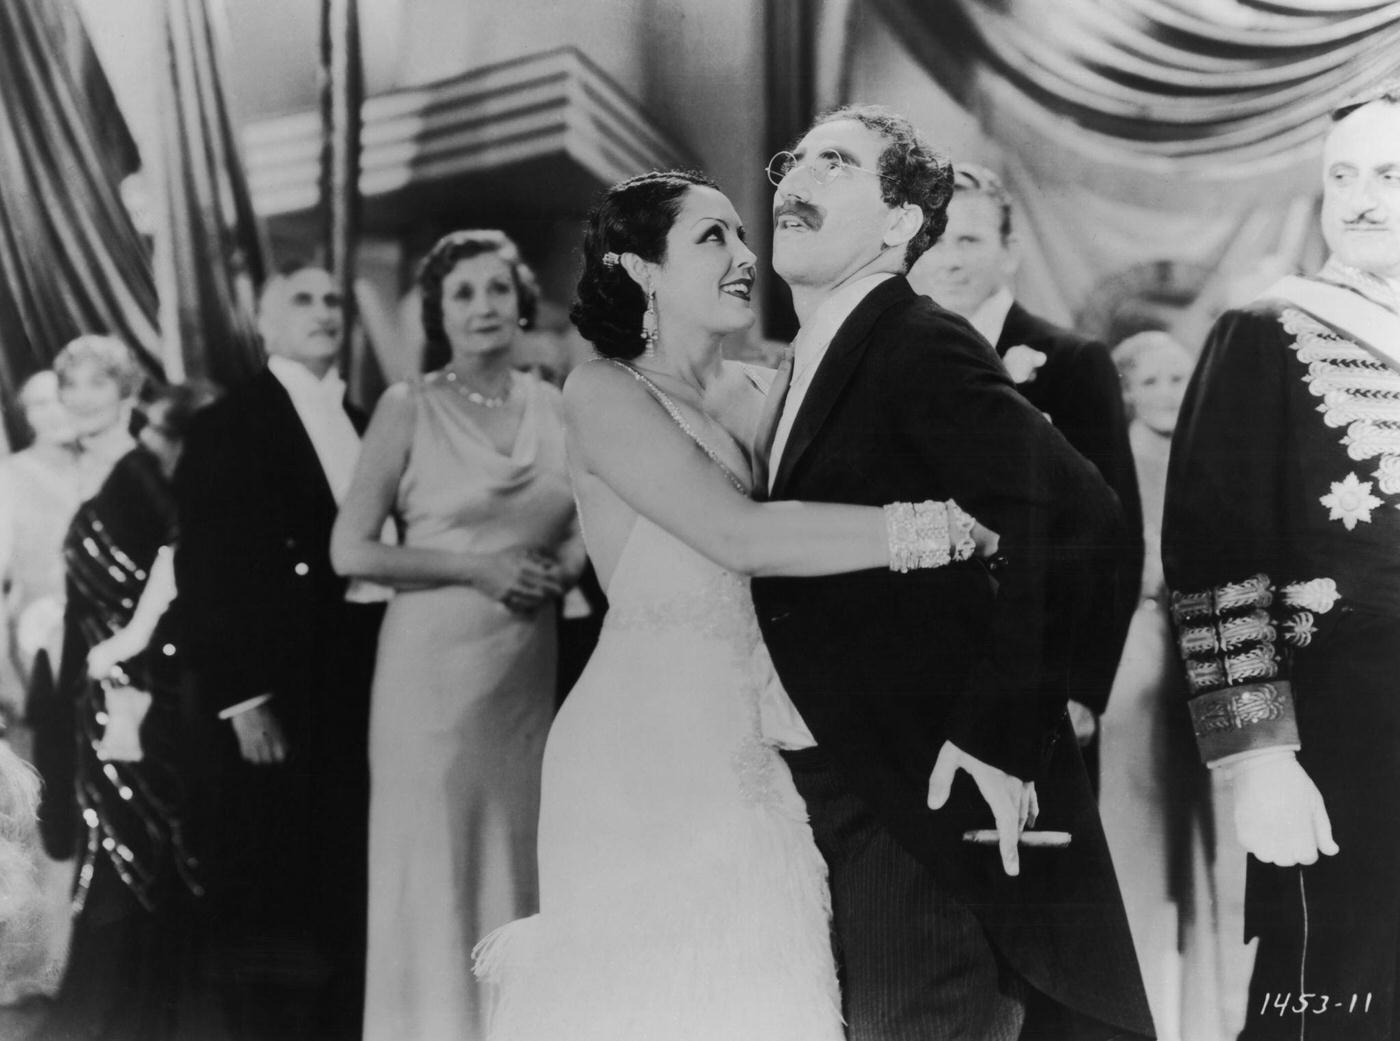 Groucho Marx captivated by Raquel Torres in Duck Soup (1933).